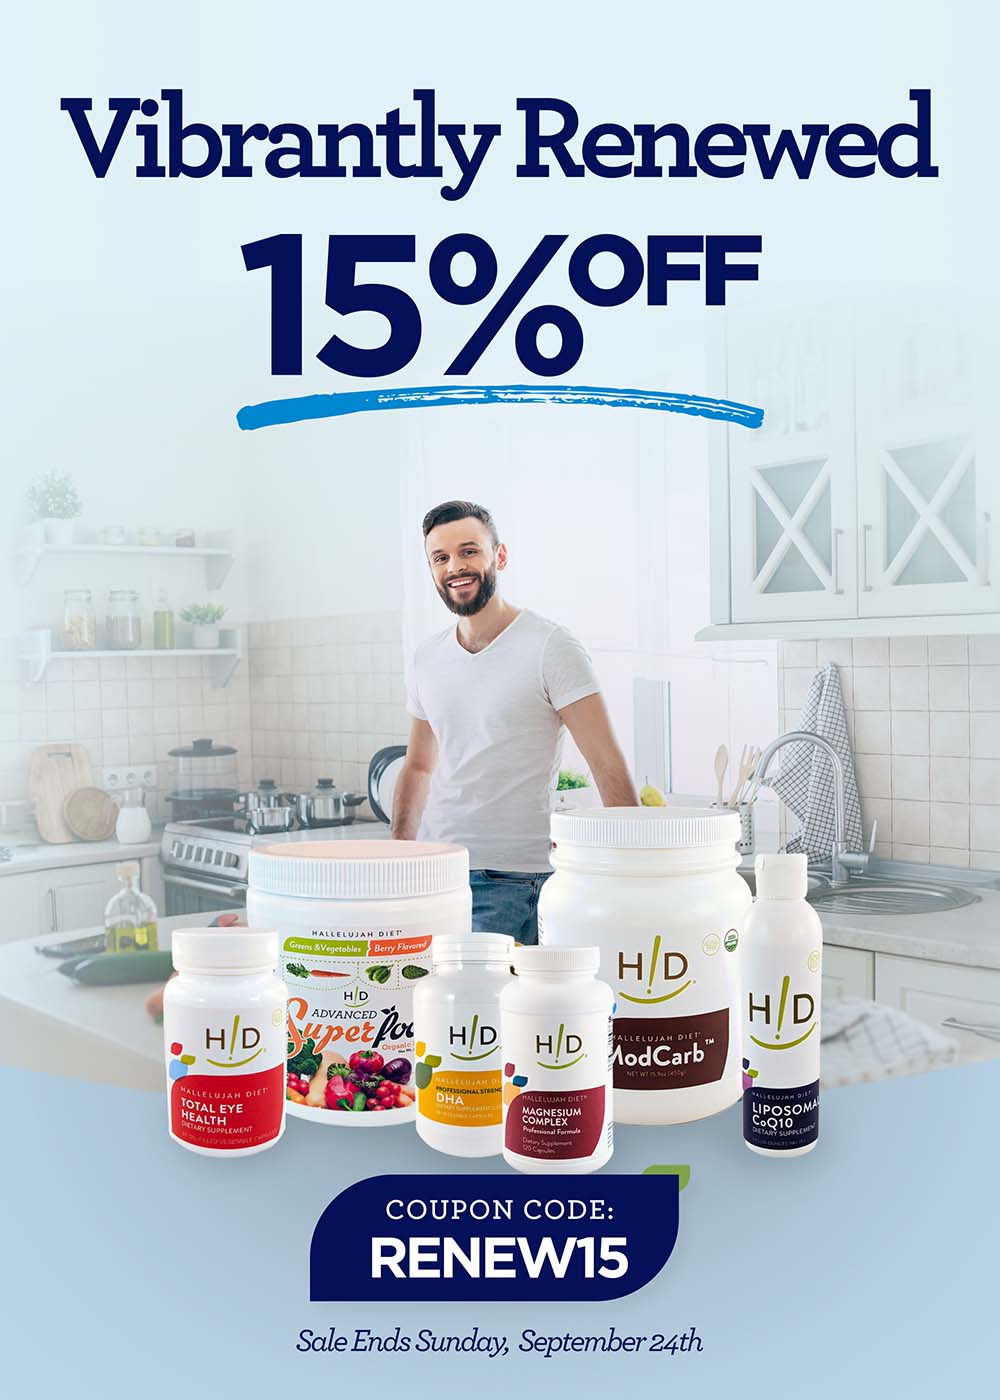 Happy man in kitchen with assortment of plant-based supplements on sale